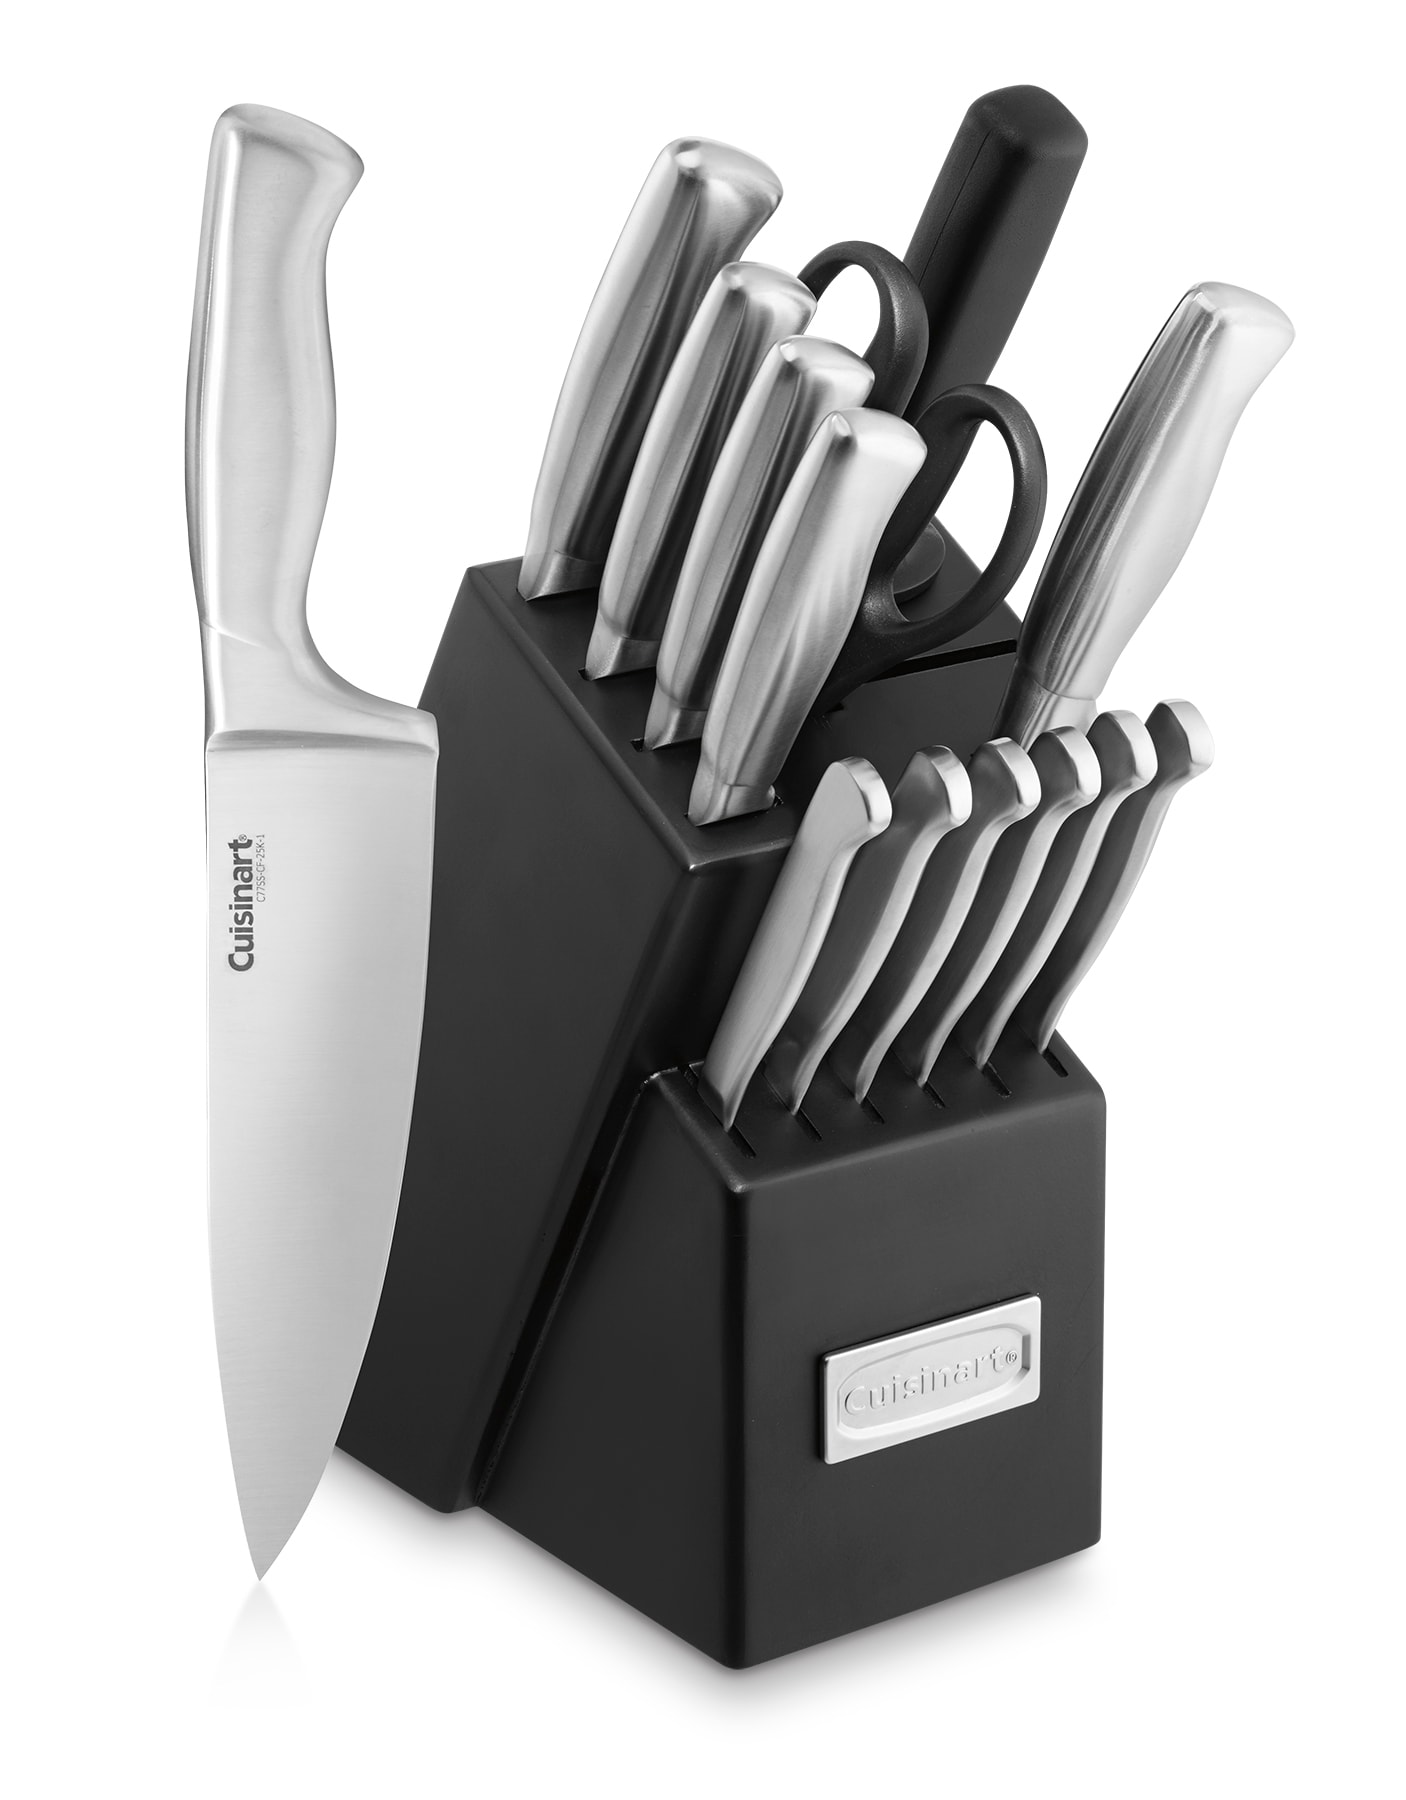  Chicago Cutlery Essentials 15 Piece Stainless Steel Kitchen  Knife Set with Shears, Paring, Fruit, Utility, Santoku, Bread, and Steak  Knives, Knife Set for the Kitchen with Block: Block Knife Sets: Home